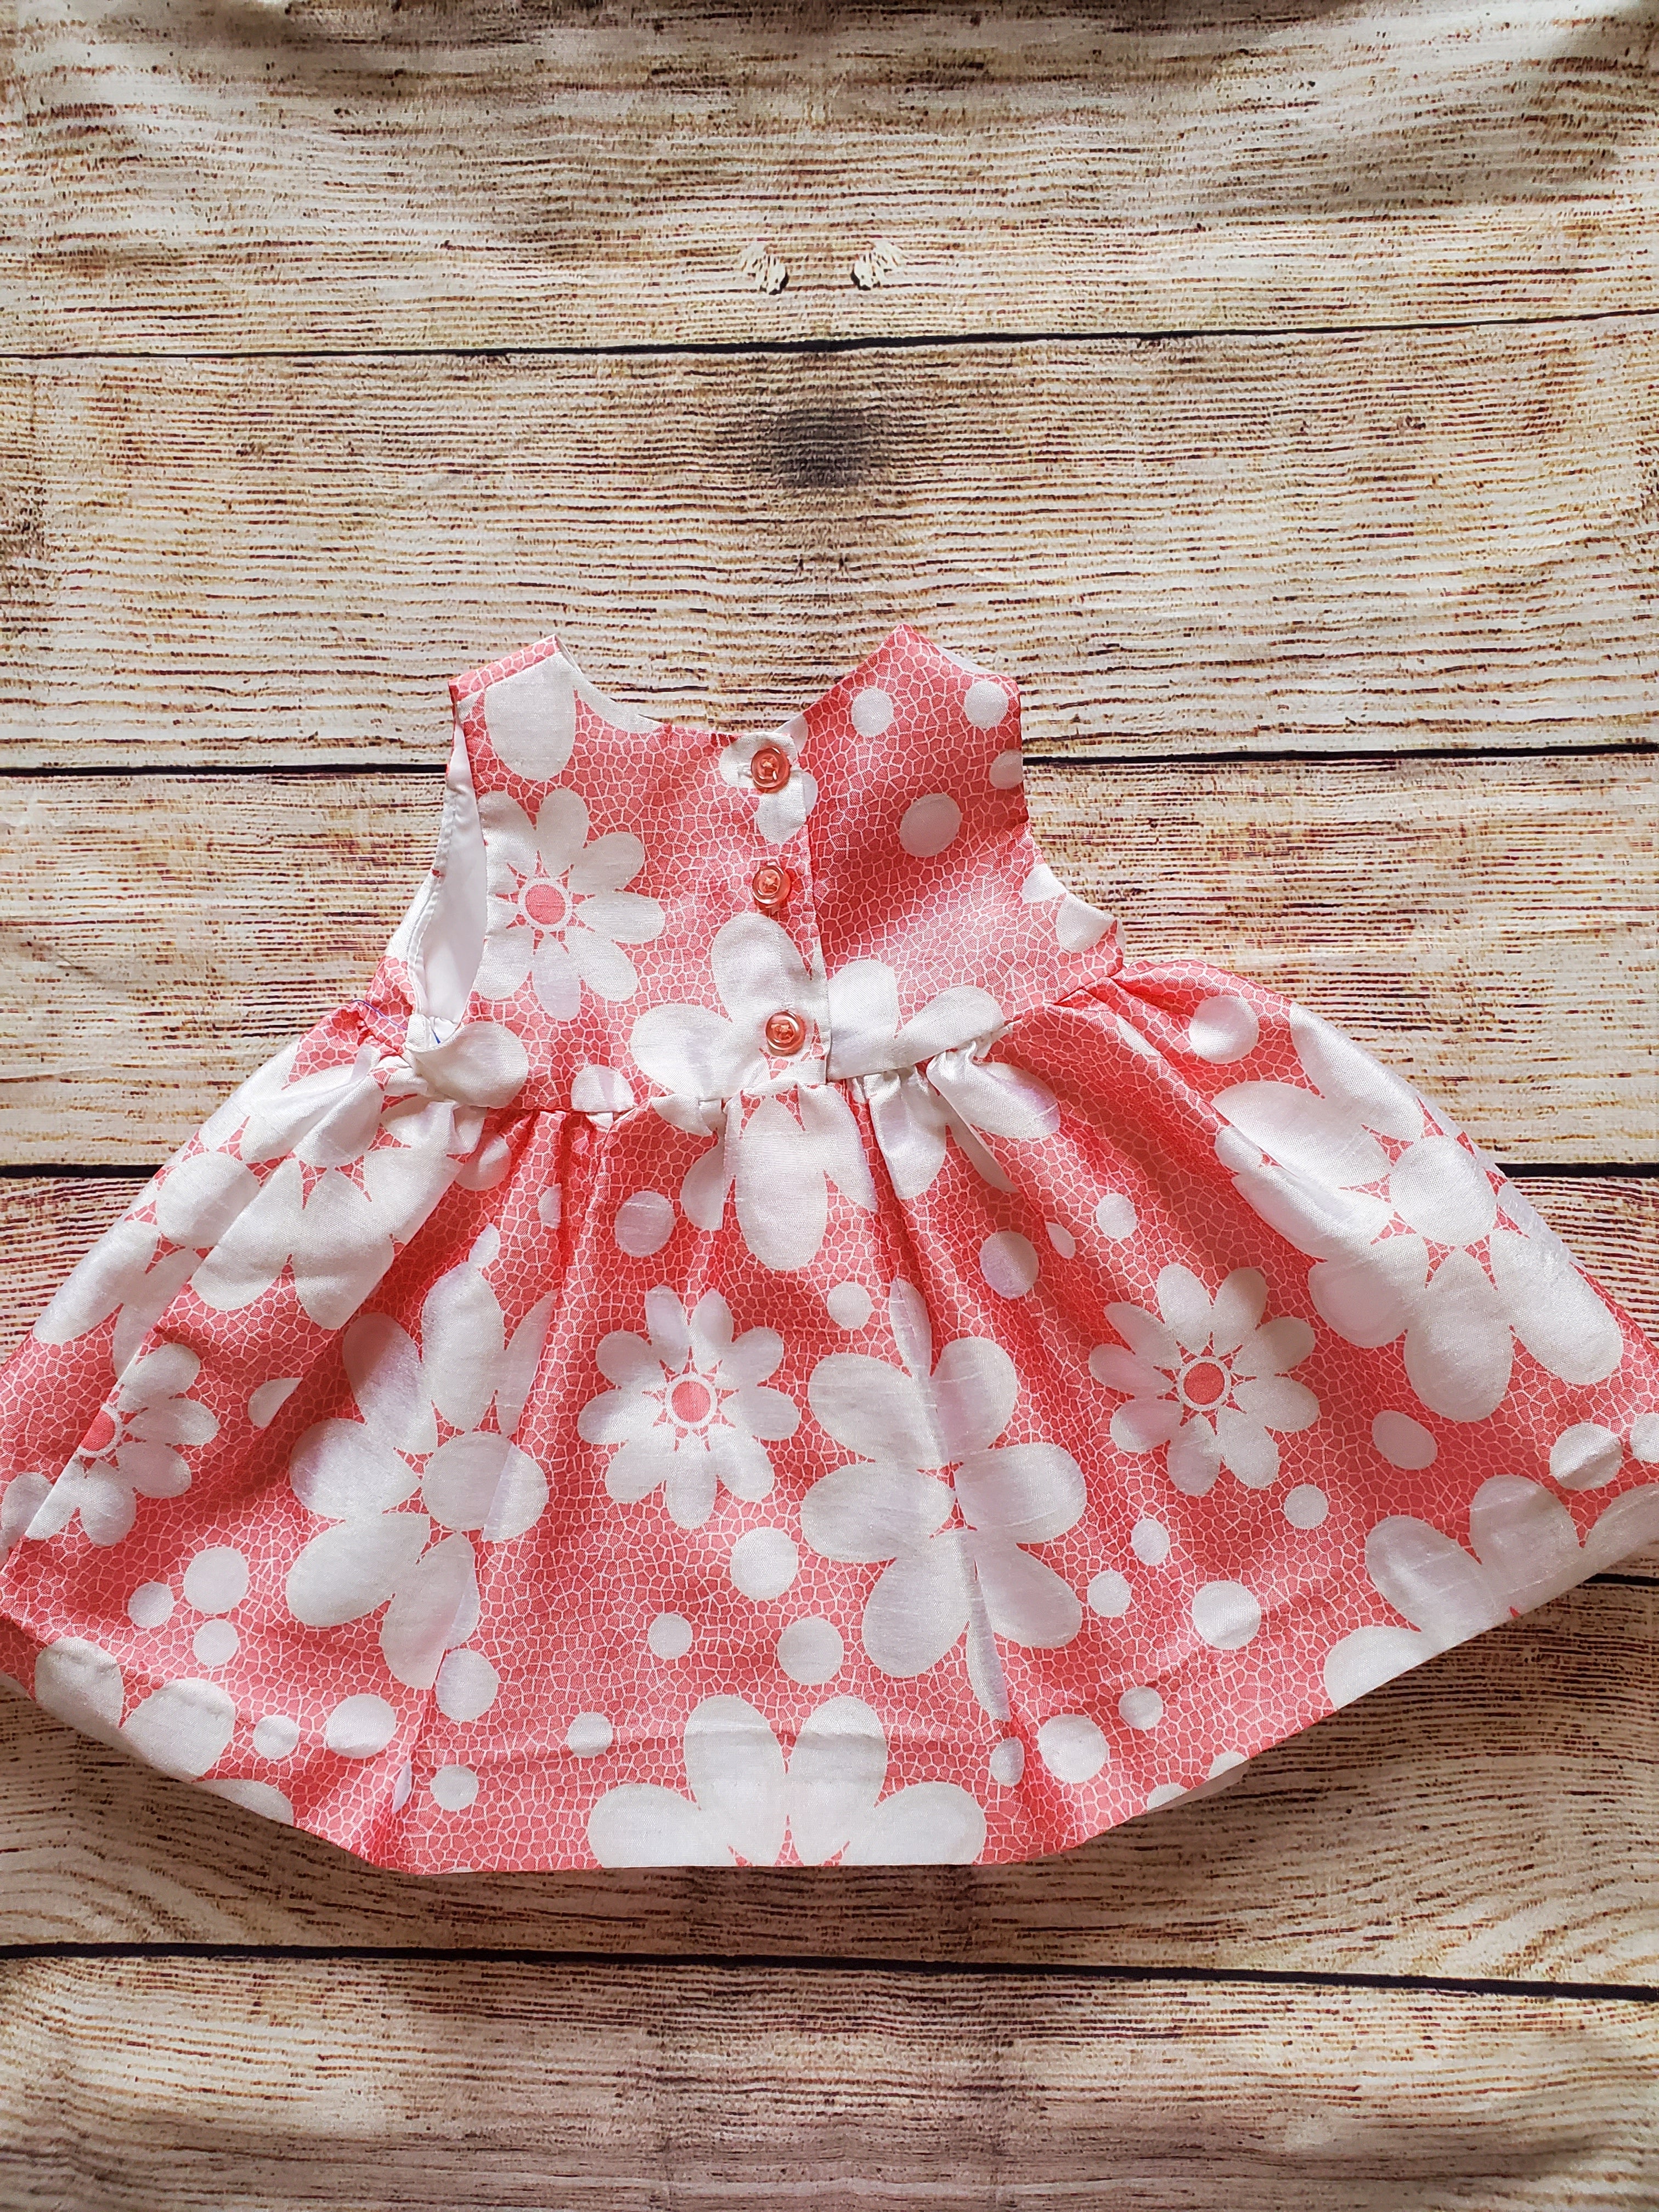 Holiday Edition Baby Girl Dress sz 0-3 months